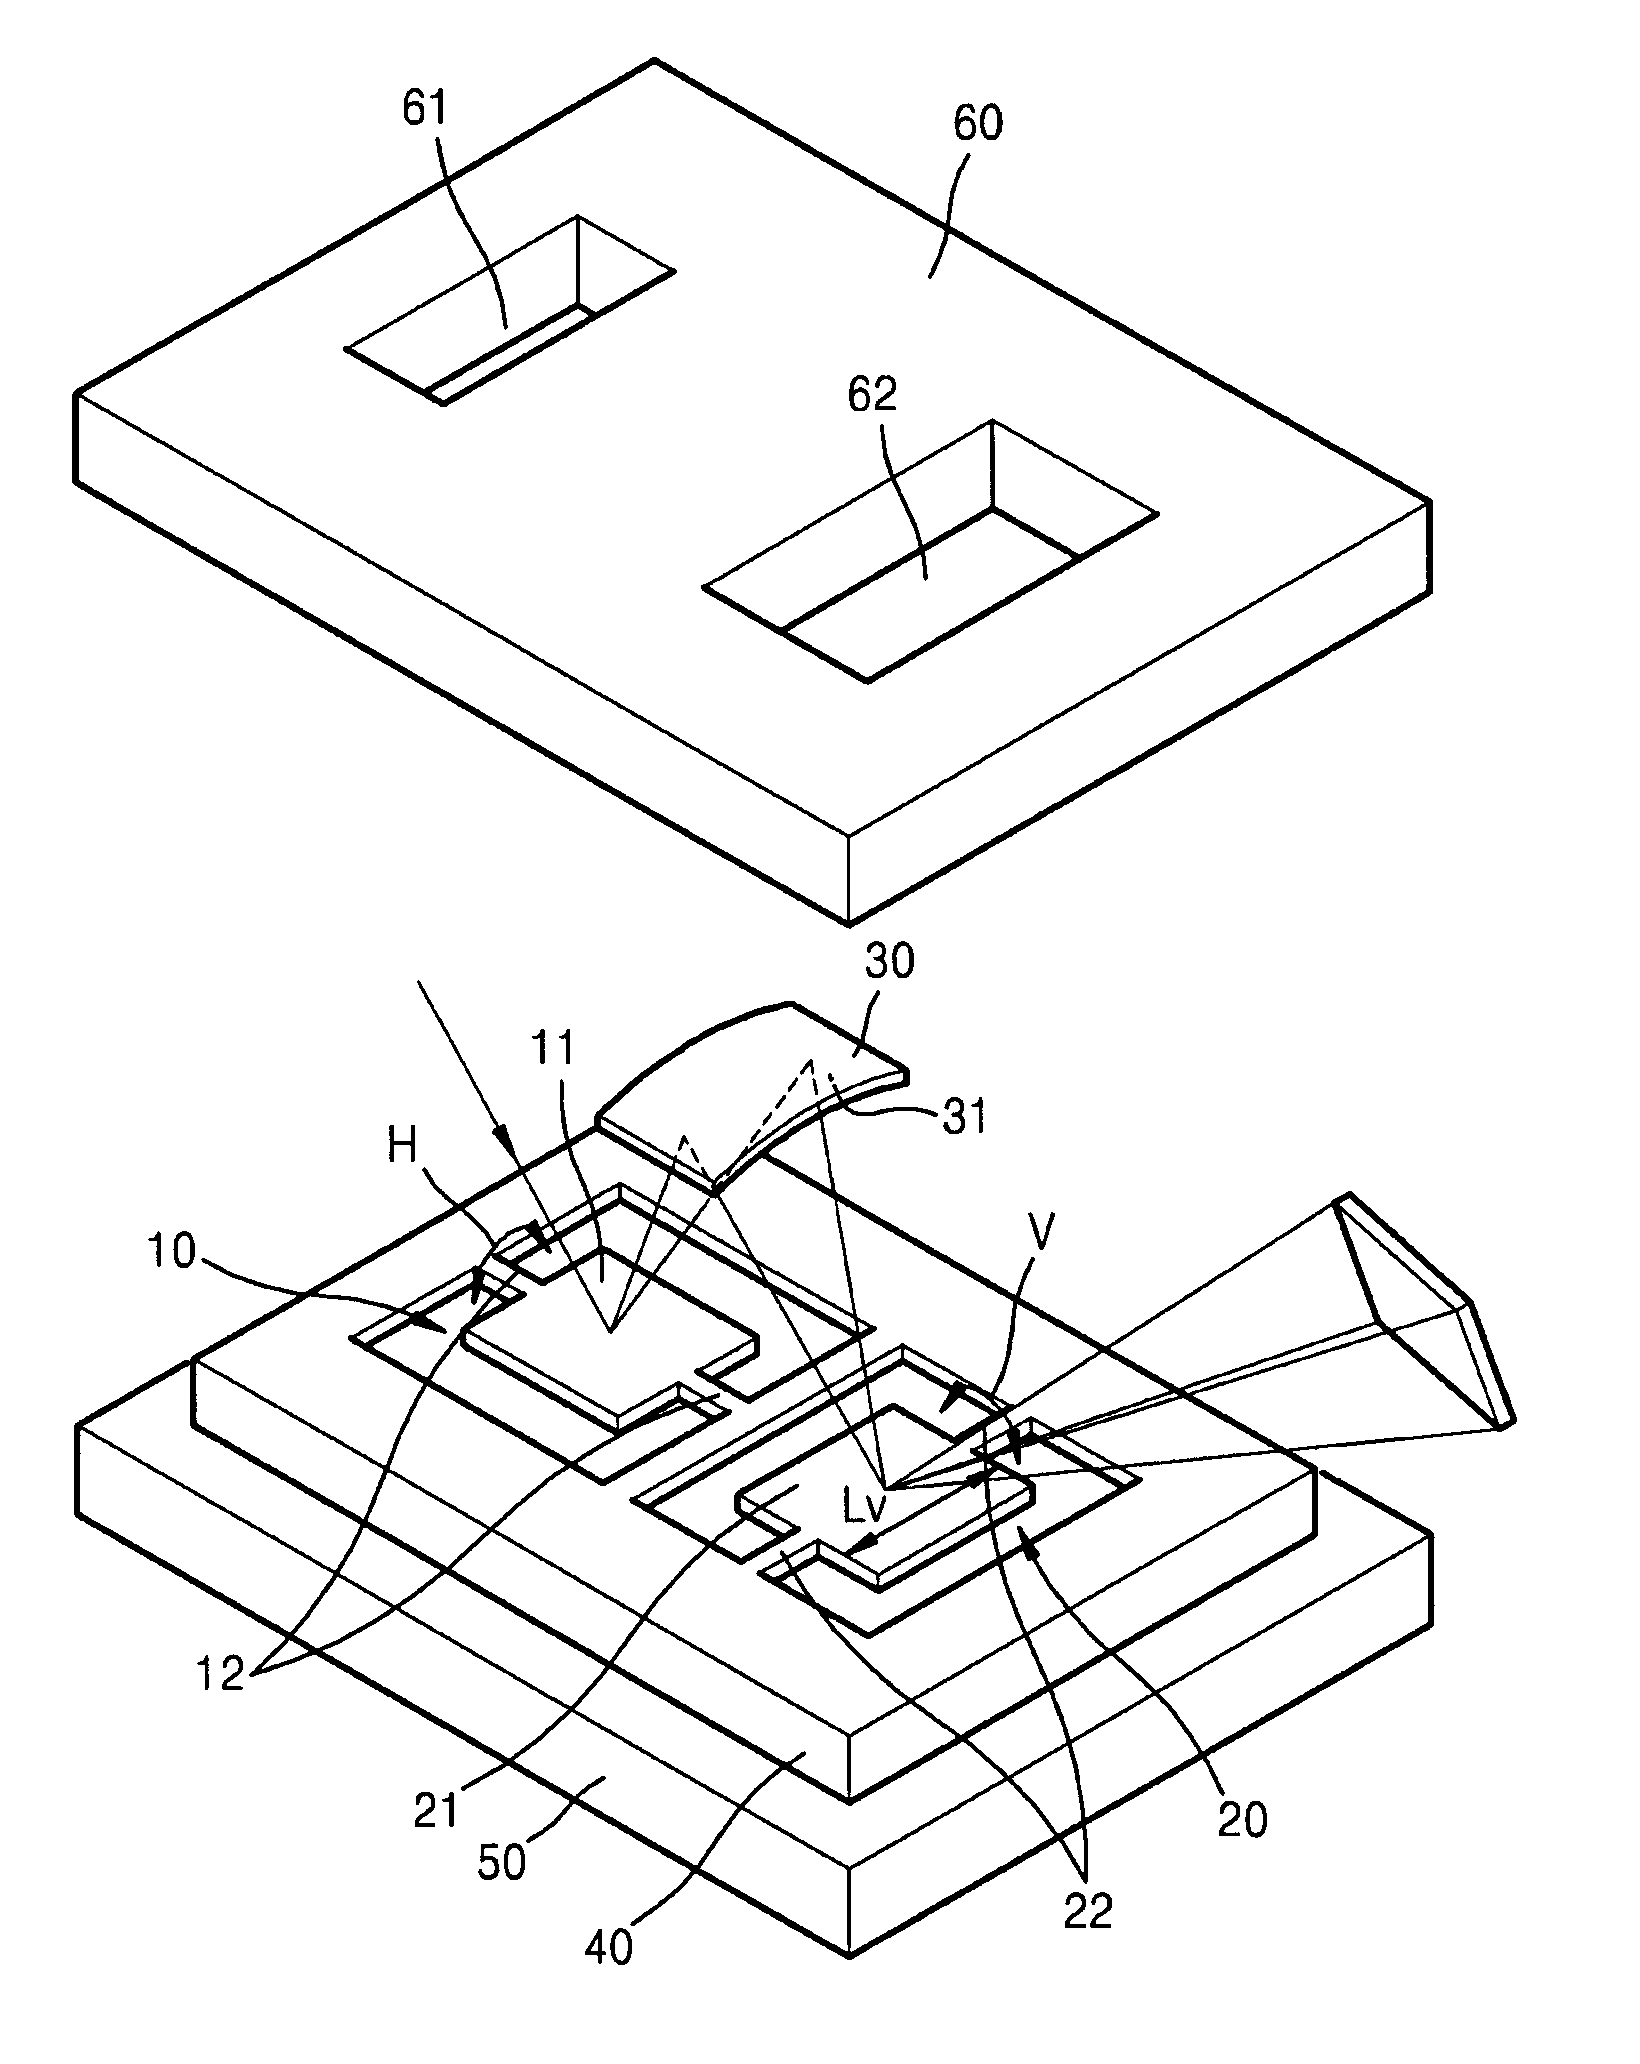 Two-dimensional micro optical scanner